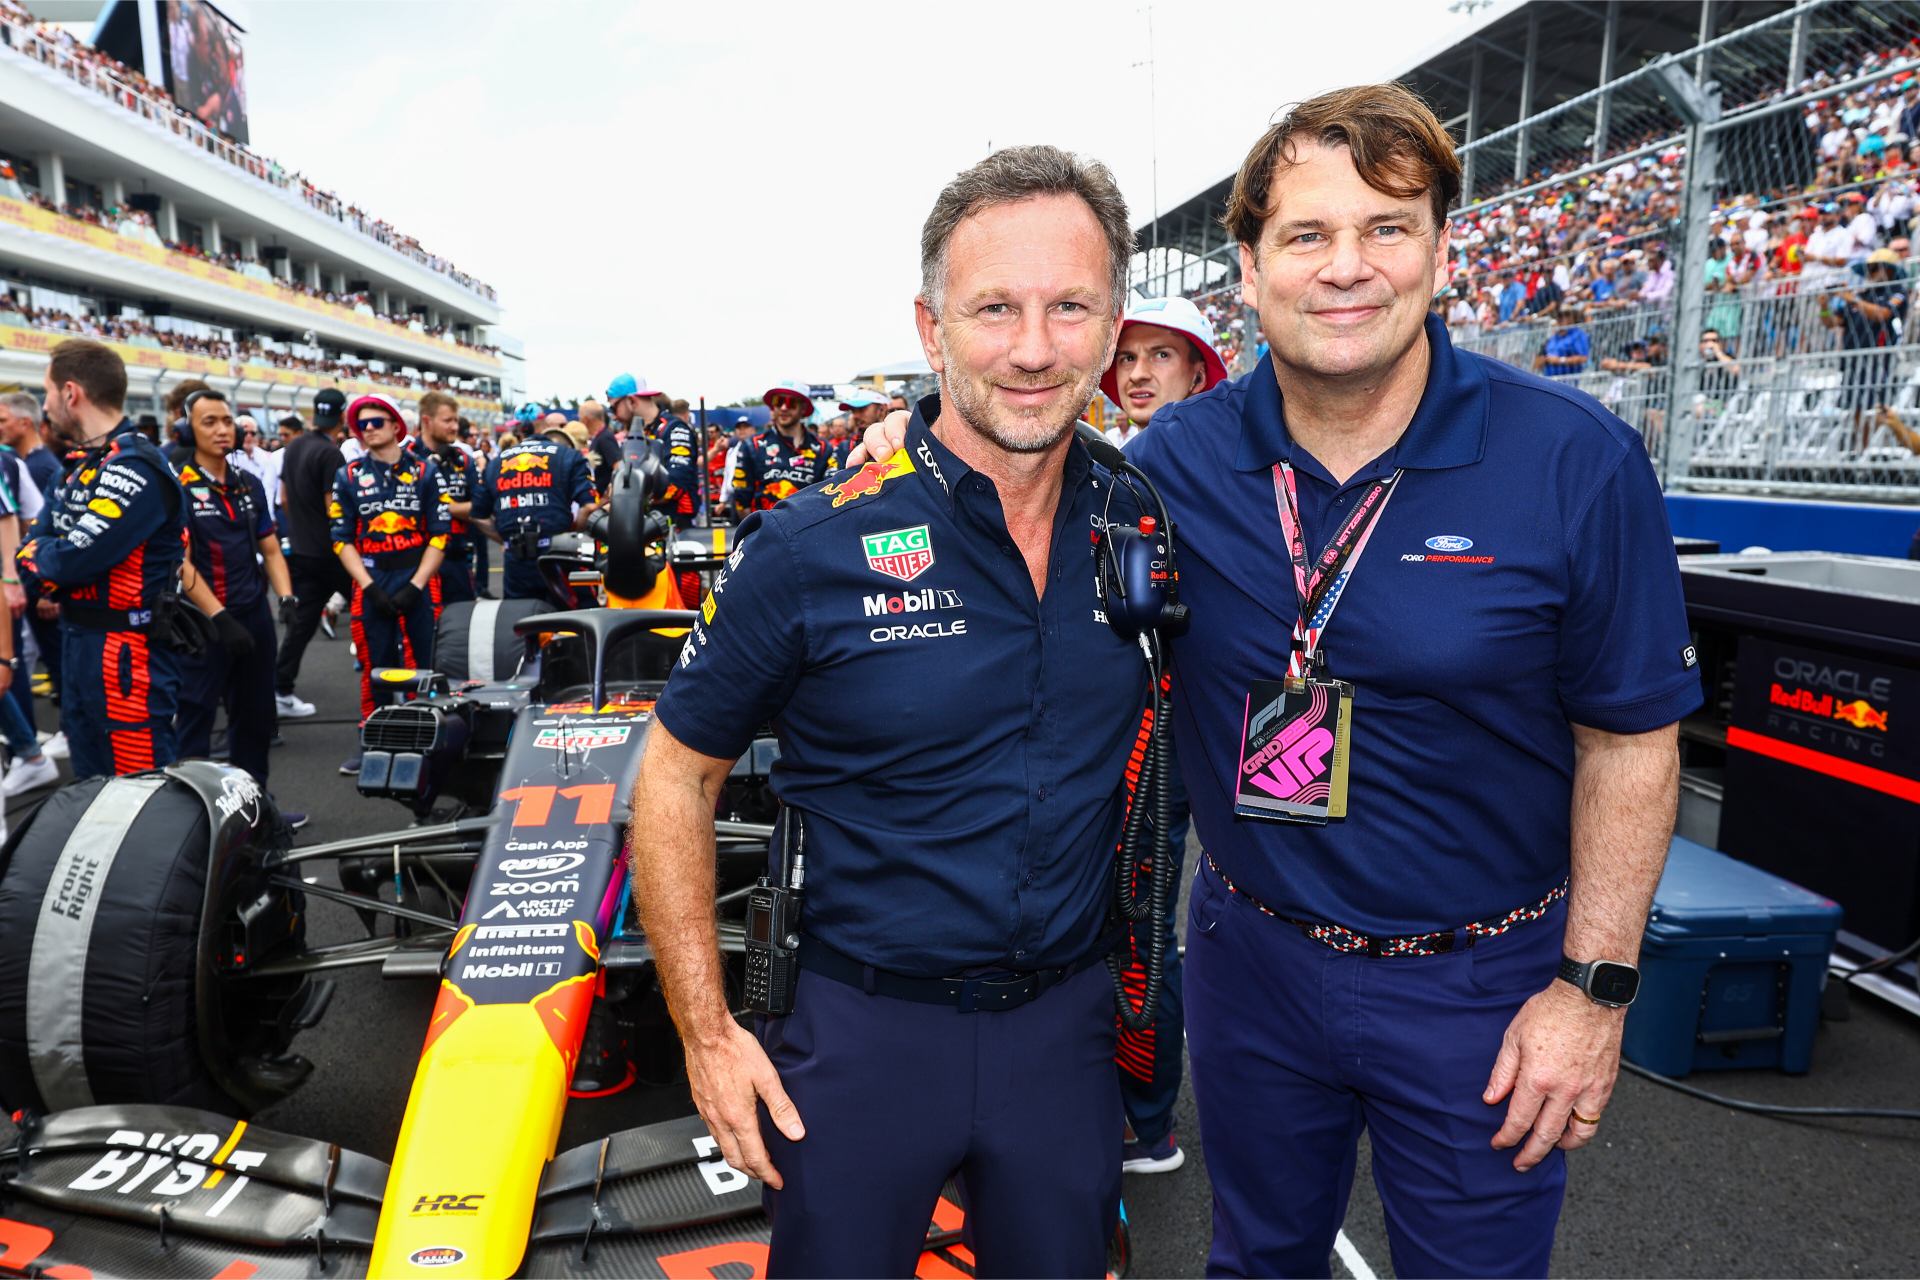 MIAMI, FLORIDA - MAY 07: Red Bull Racing Team Principal Christian Horner and Jim Farley, CEO of Ford pose for a photo on the grid prior to the F1 Grand Prix of Miami at Miami International Autodrome on May 07, 2023 in Miami, Florida